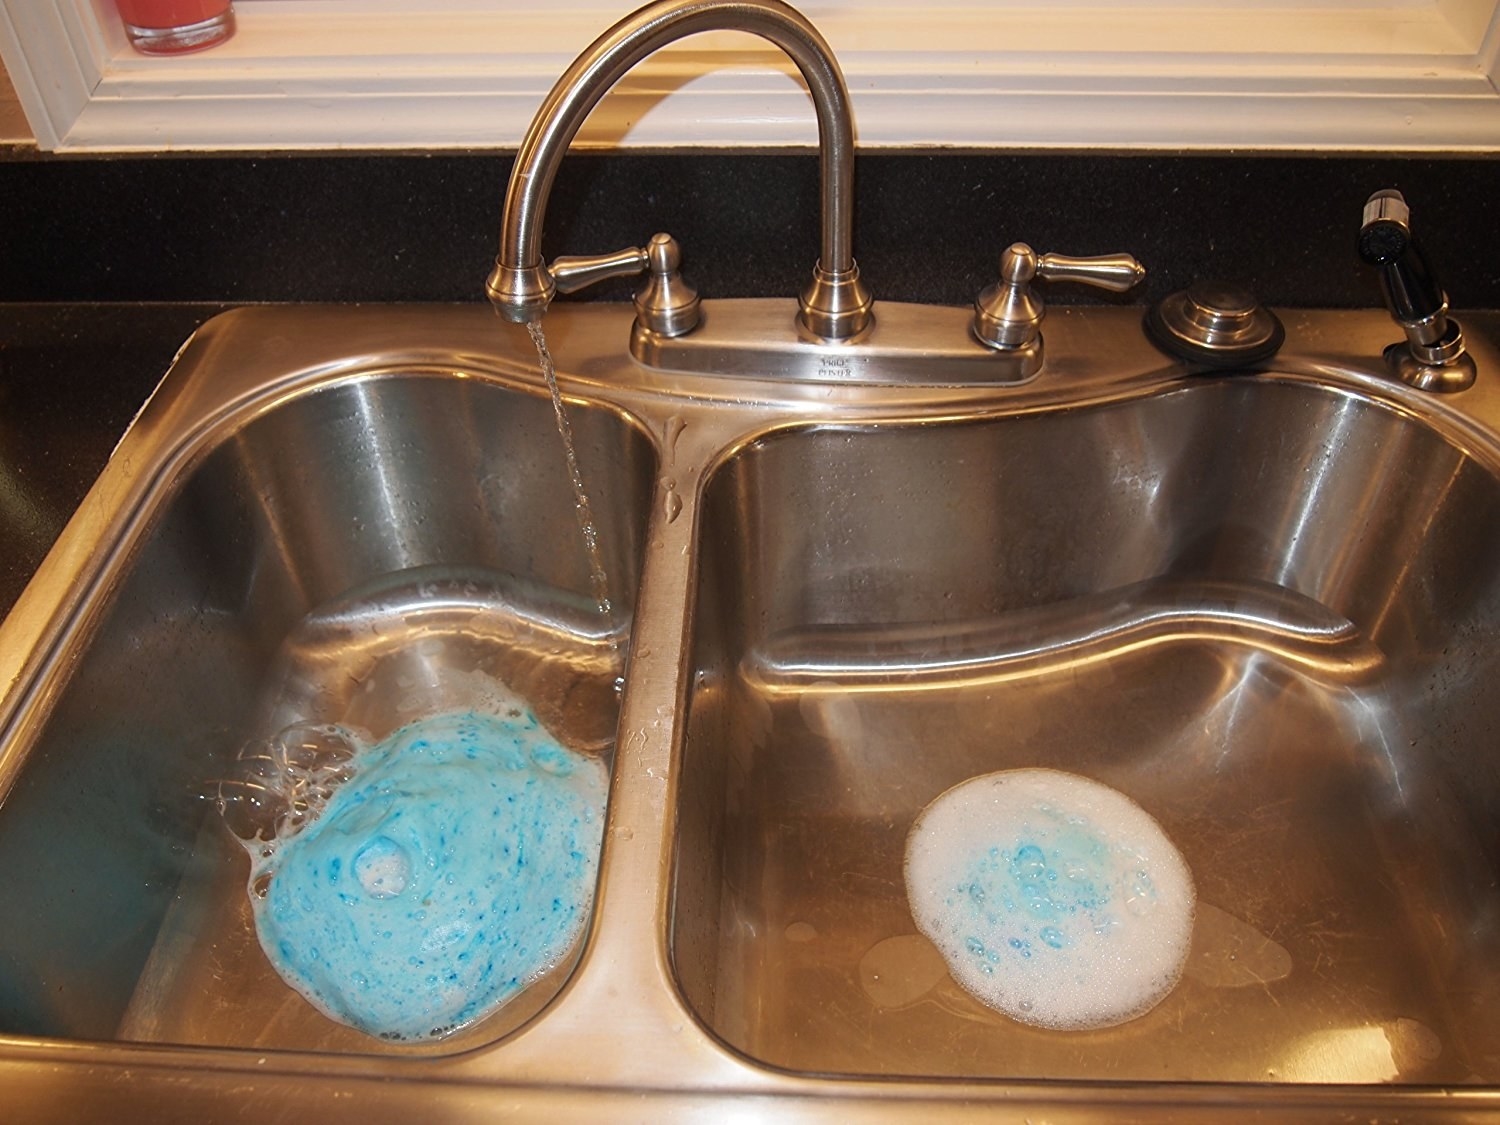 double kitchen sink with blue foam cleaner coming up from the drain